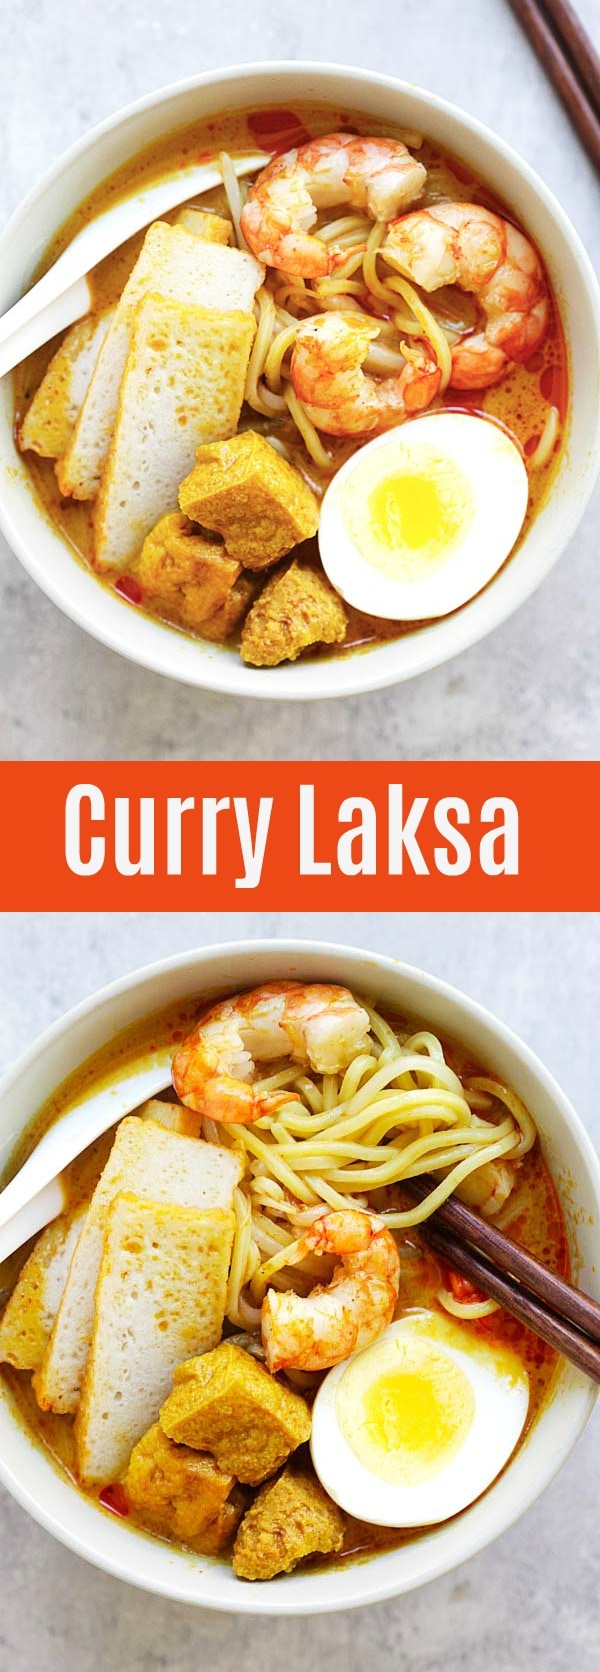 Laksa - Spicy street food noodle dish popular in Malaysia and Singapore. This homemade curry laksa recipe is so easy and delicious | rasamalaysia.com